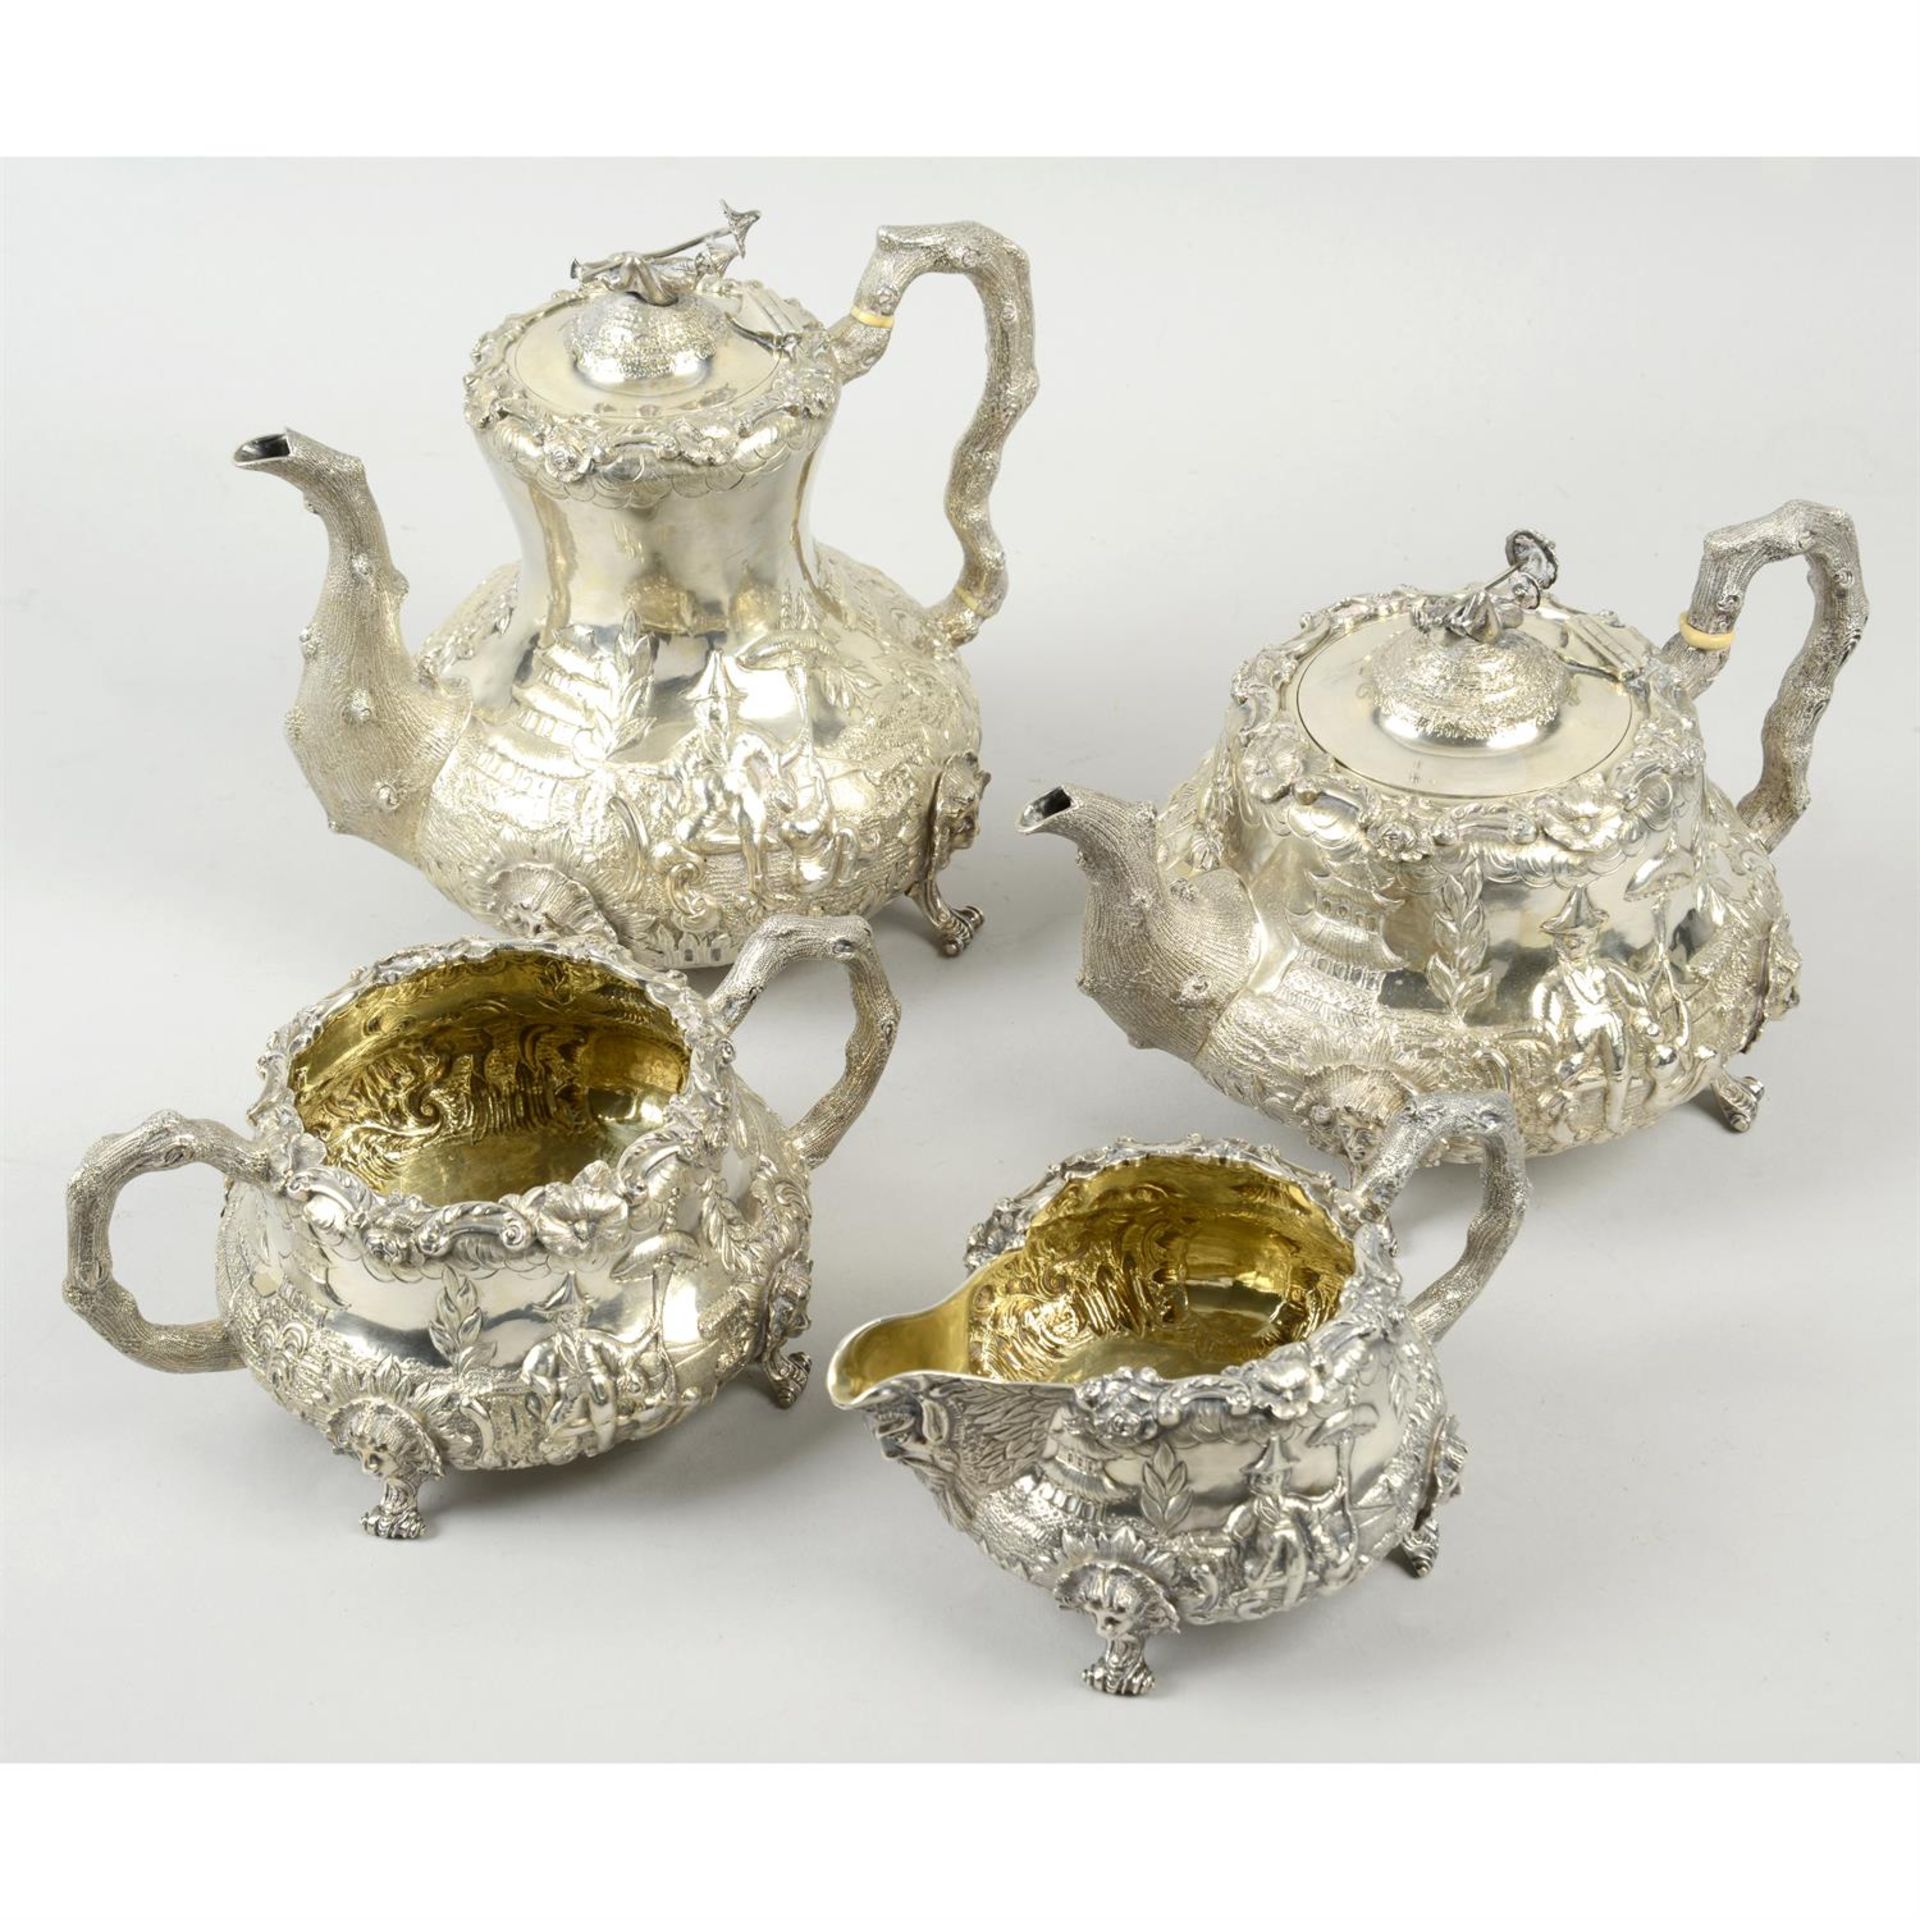 An impressive early Victorian silver Chinoiserie tea and coffee service.